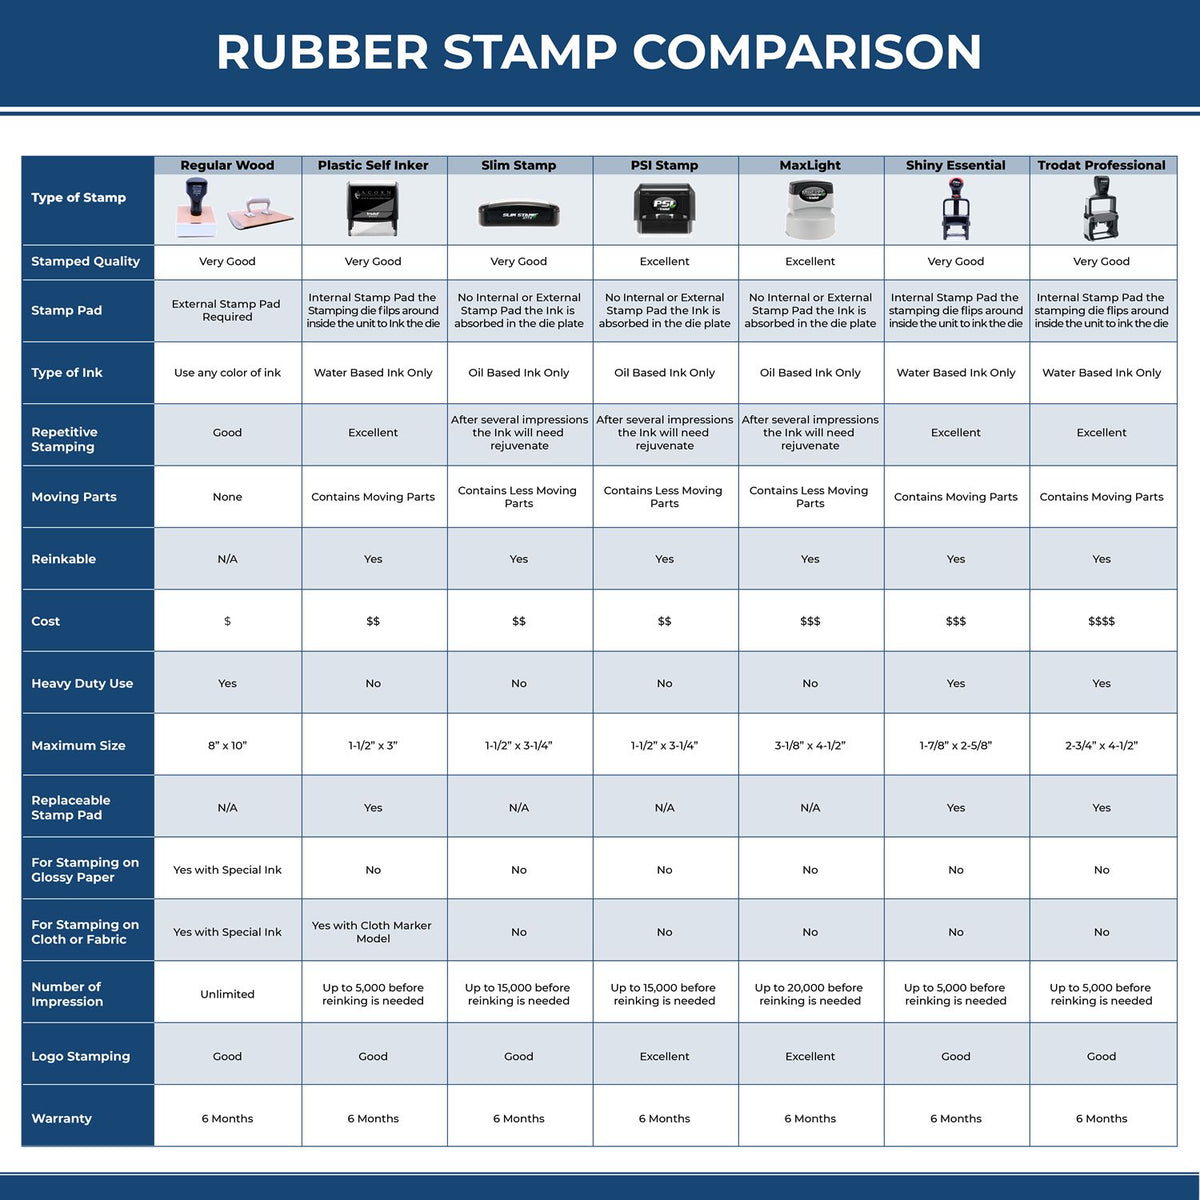 A comparison chart for the different types of mount models available for the PSI Oregon Notary Stamp.